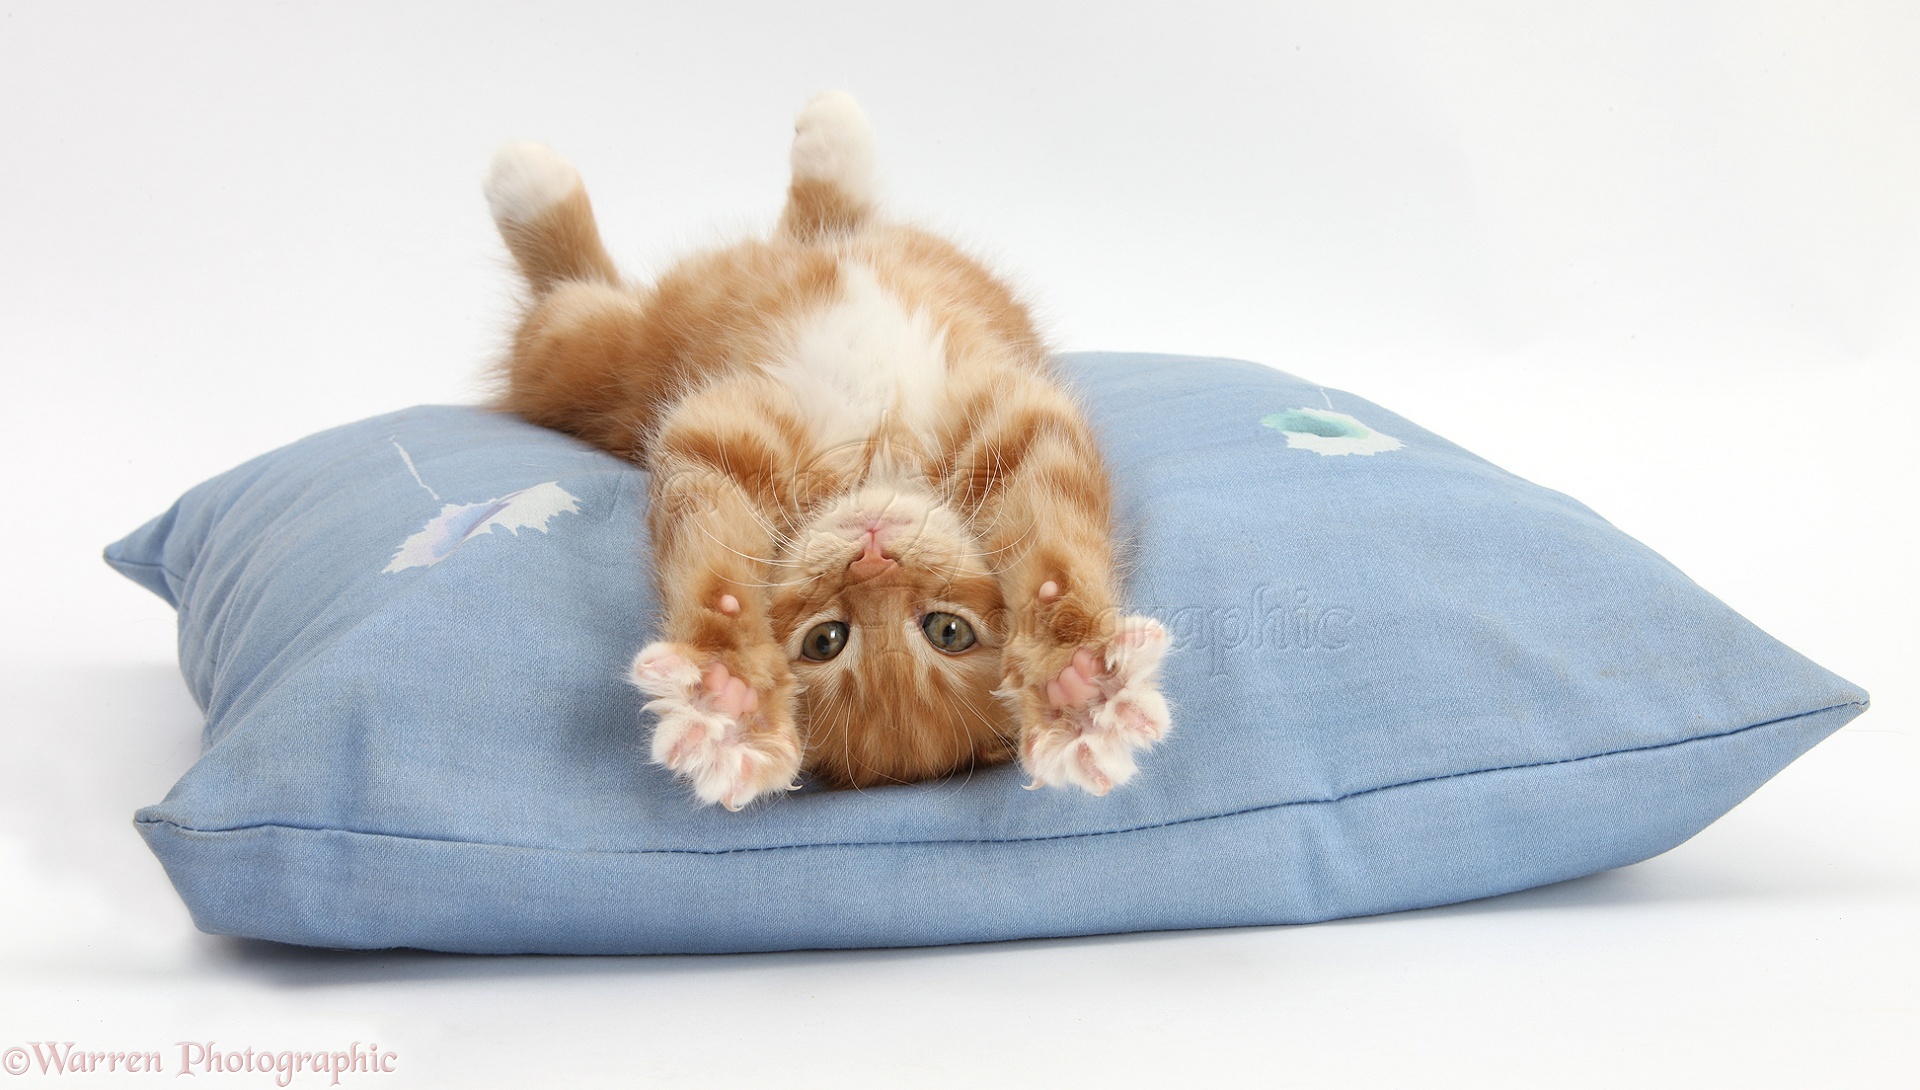 25116-Ginger-kitten-stretching-out-upside-down-on-a-cushion-white-background.jpg